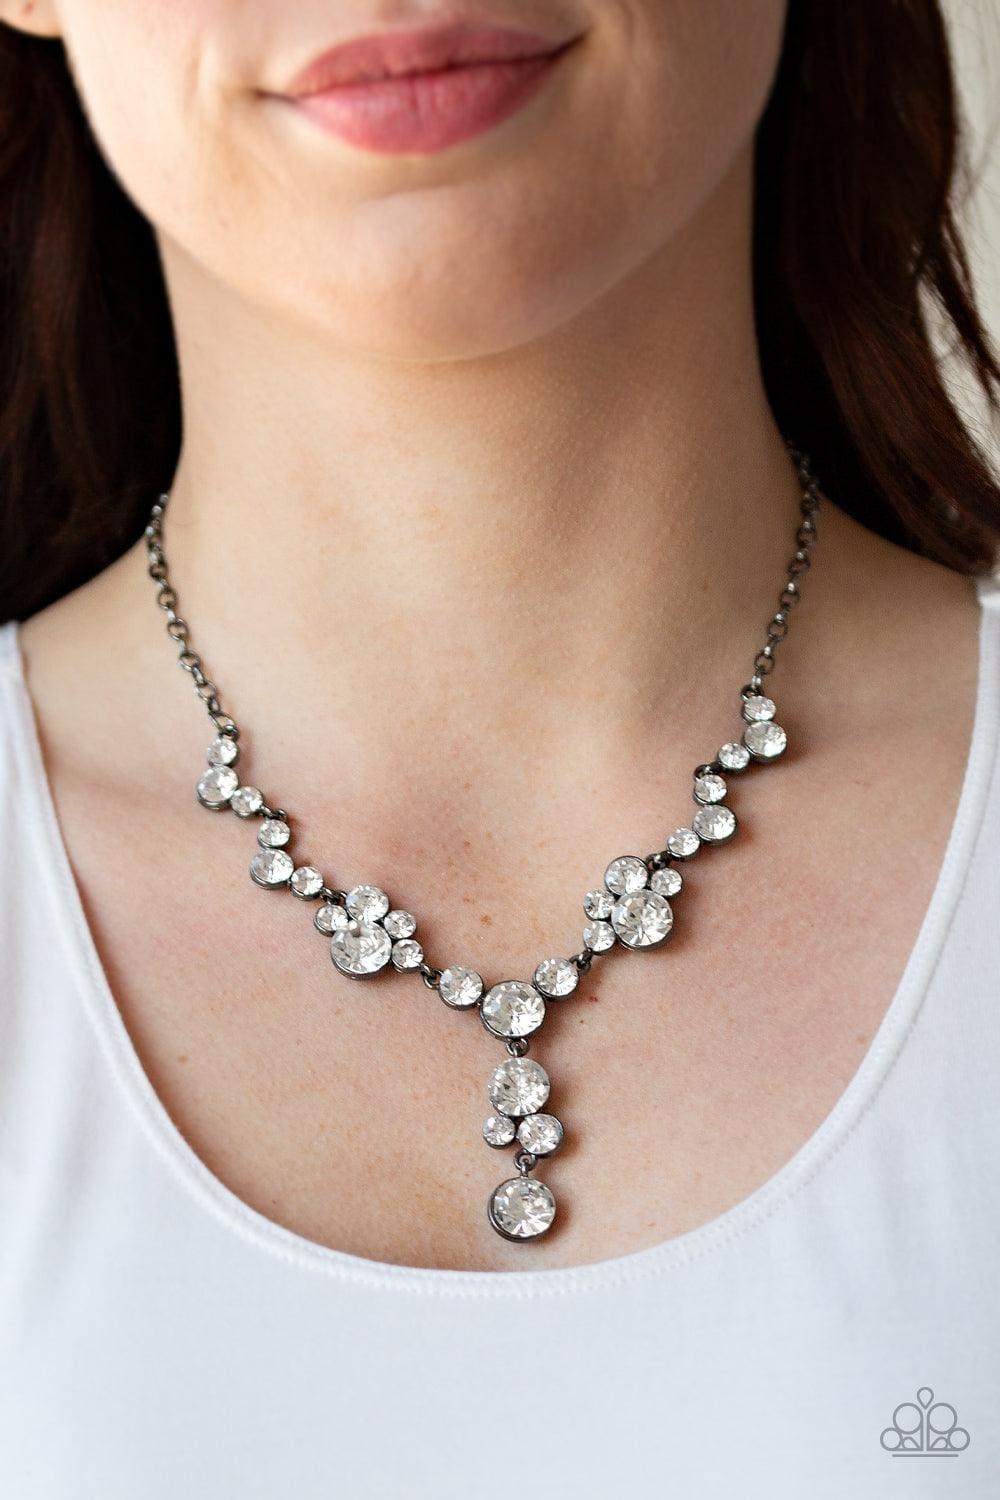 Paparazzi Accessories - Inner Light - Black Necklace - Bling by JessieK